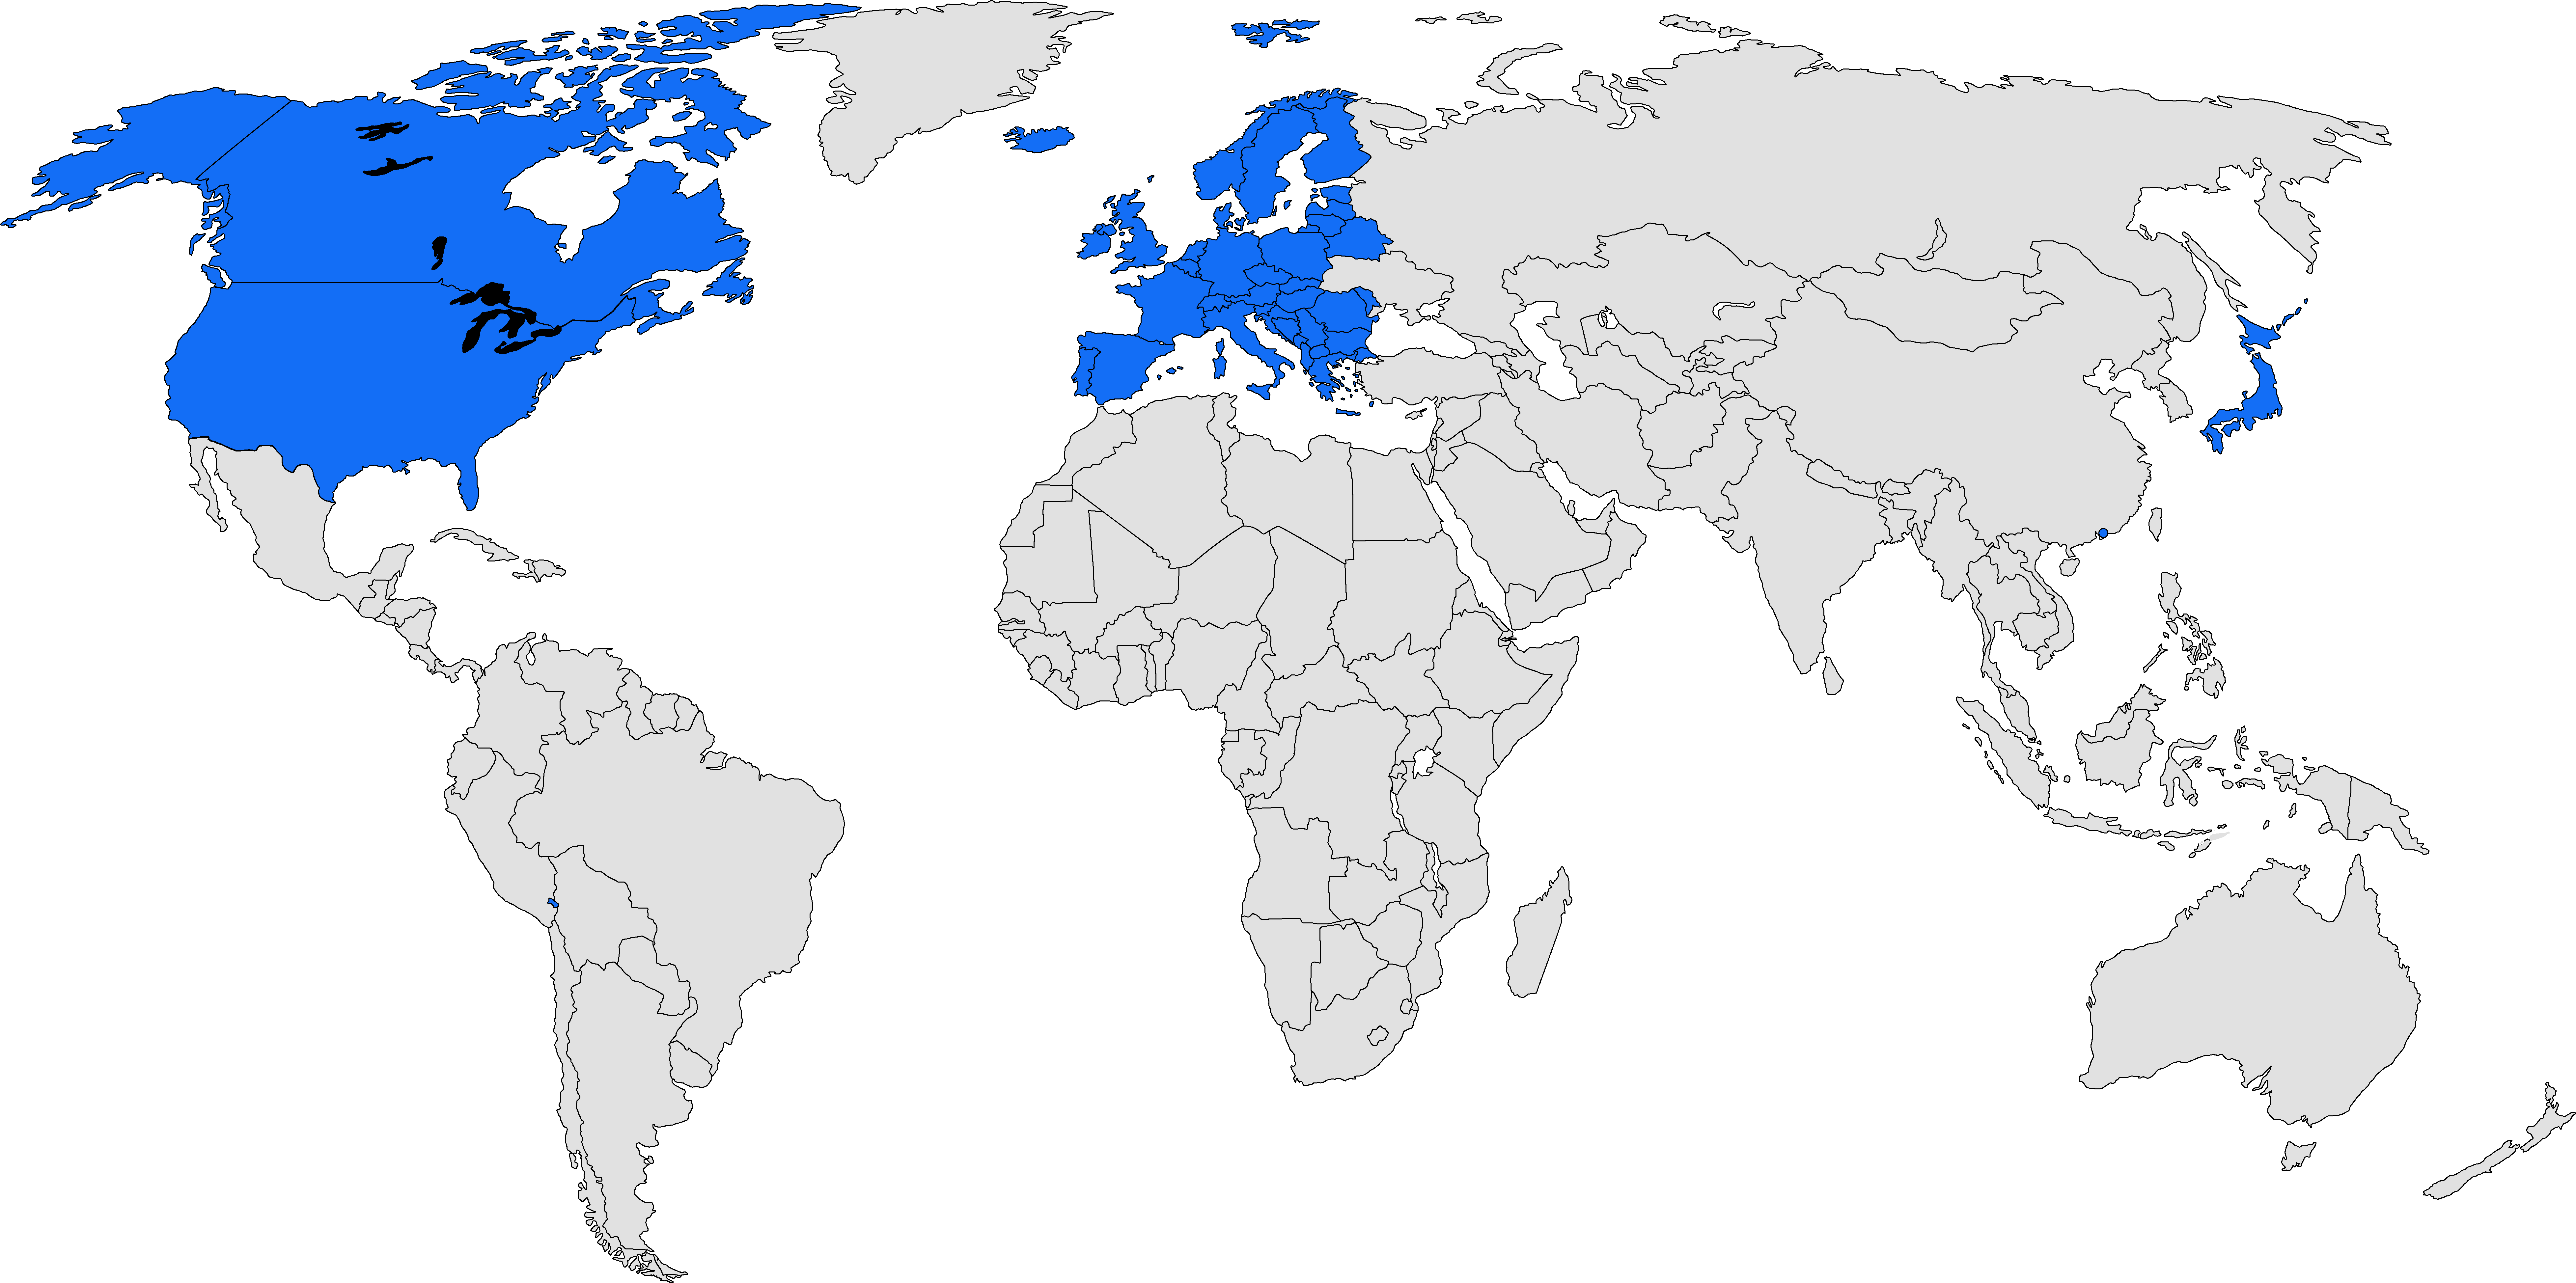 Shift4 map of offices global presence.